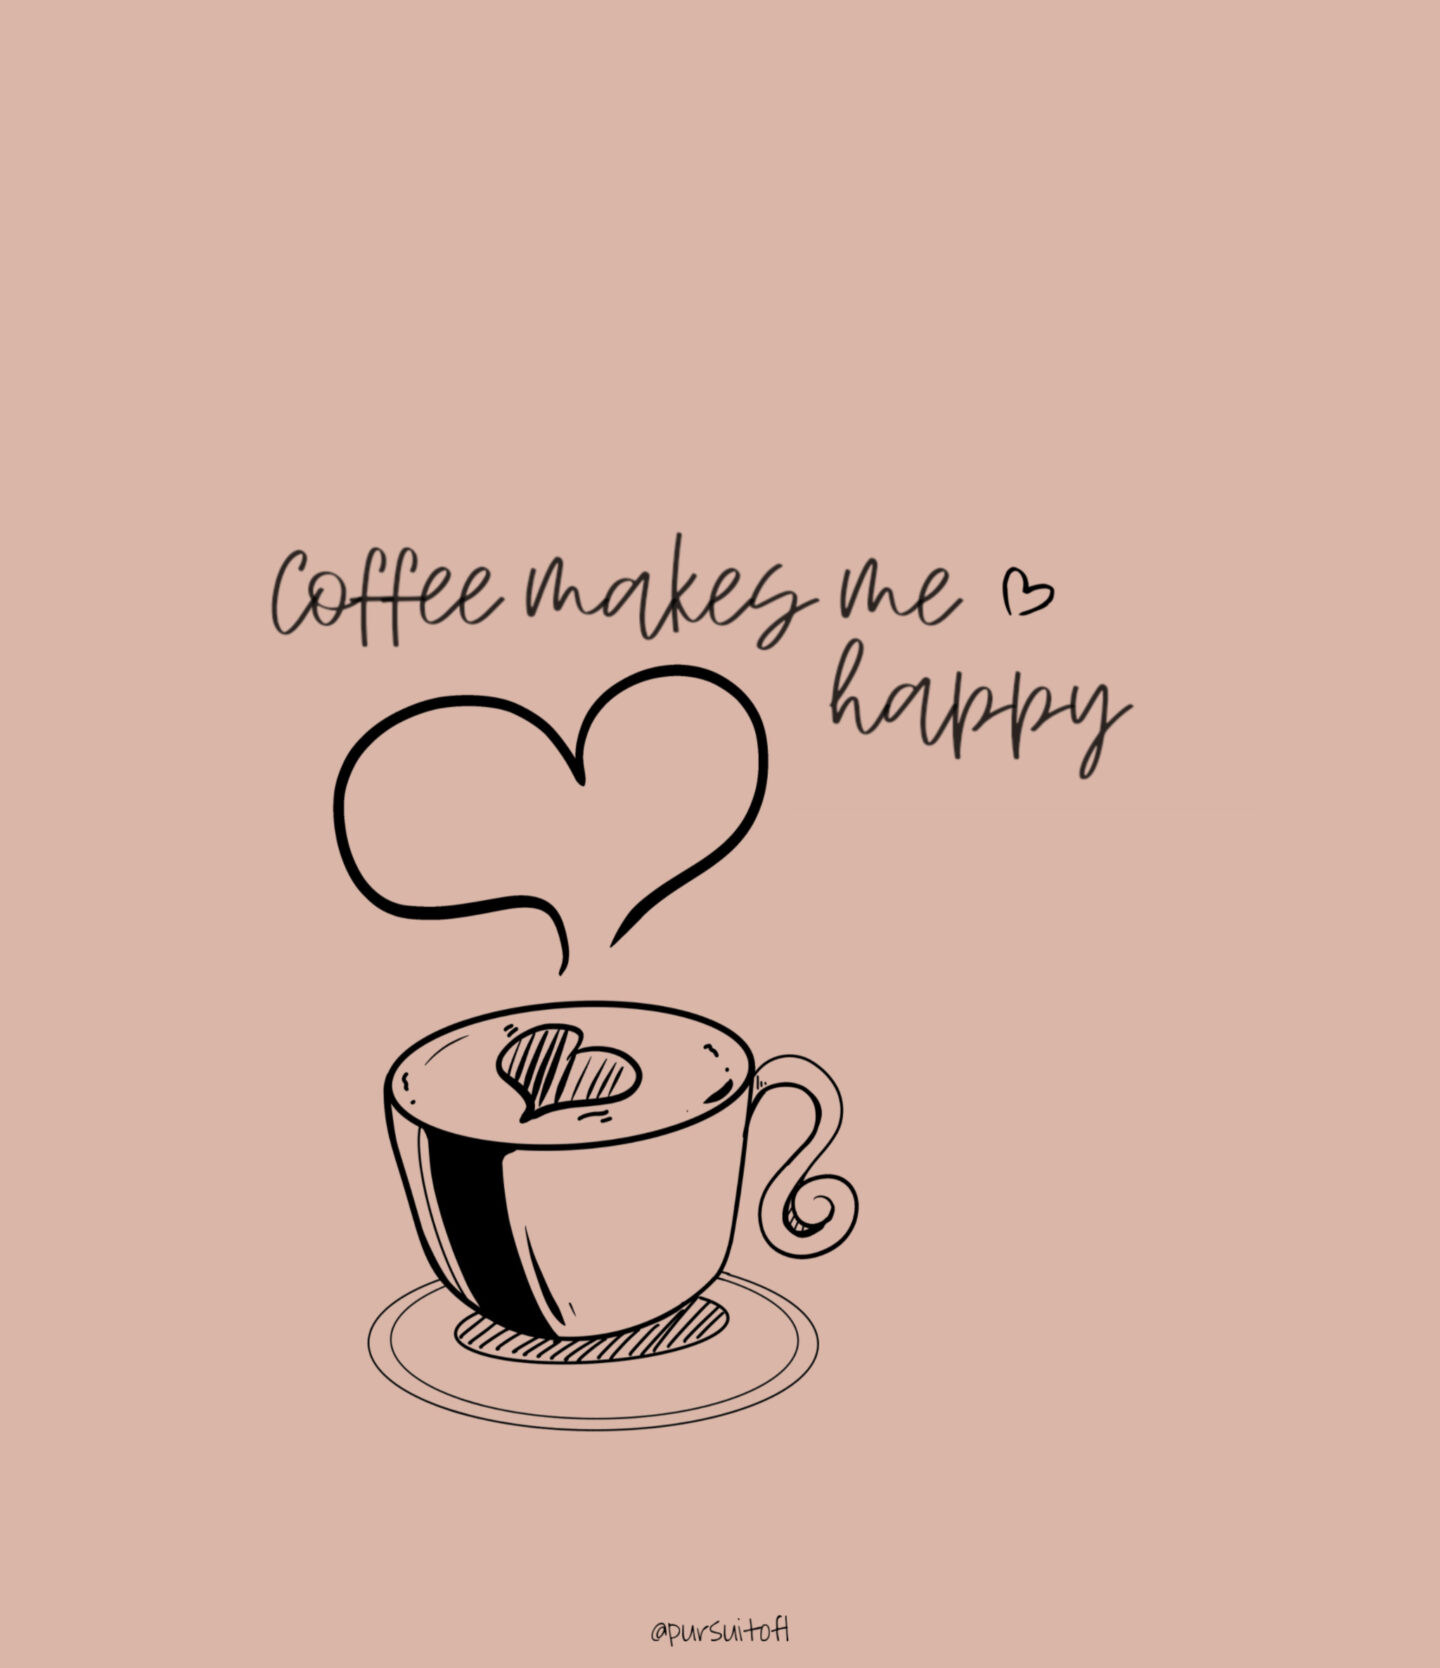 Tan Tablet Wallpaper with Coffee Makes Me Happy Text and Cup of Coffee Illustration with Steam Heart